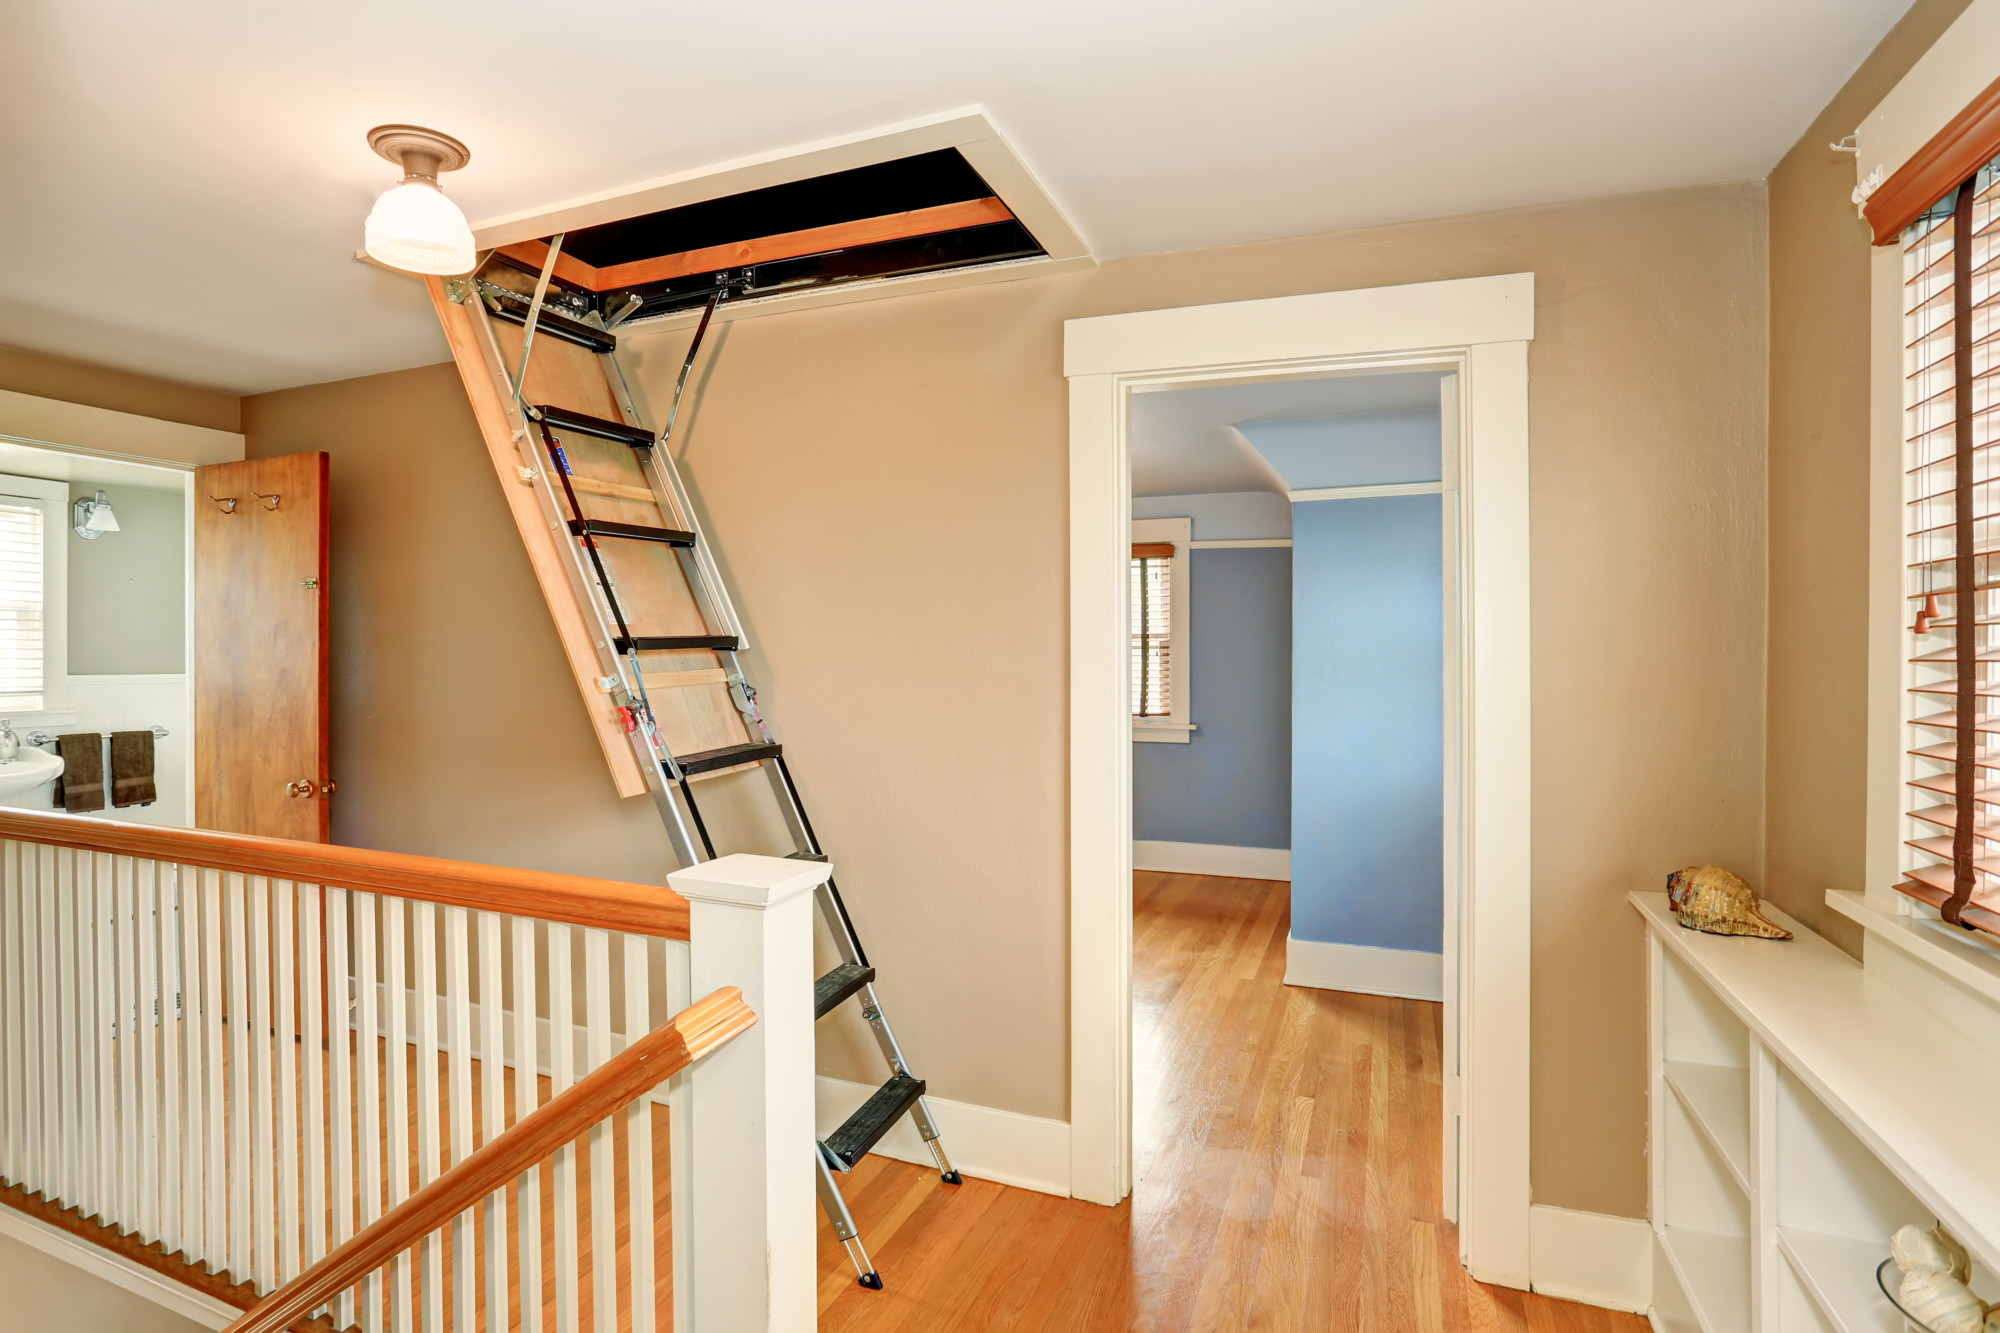 Make Your Home More Functional With These 7 Attic Organization Ideas